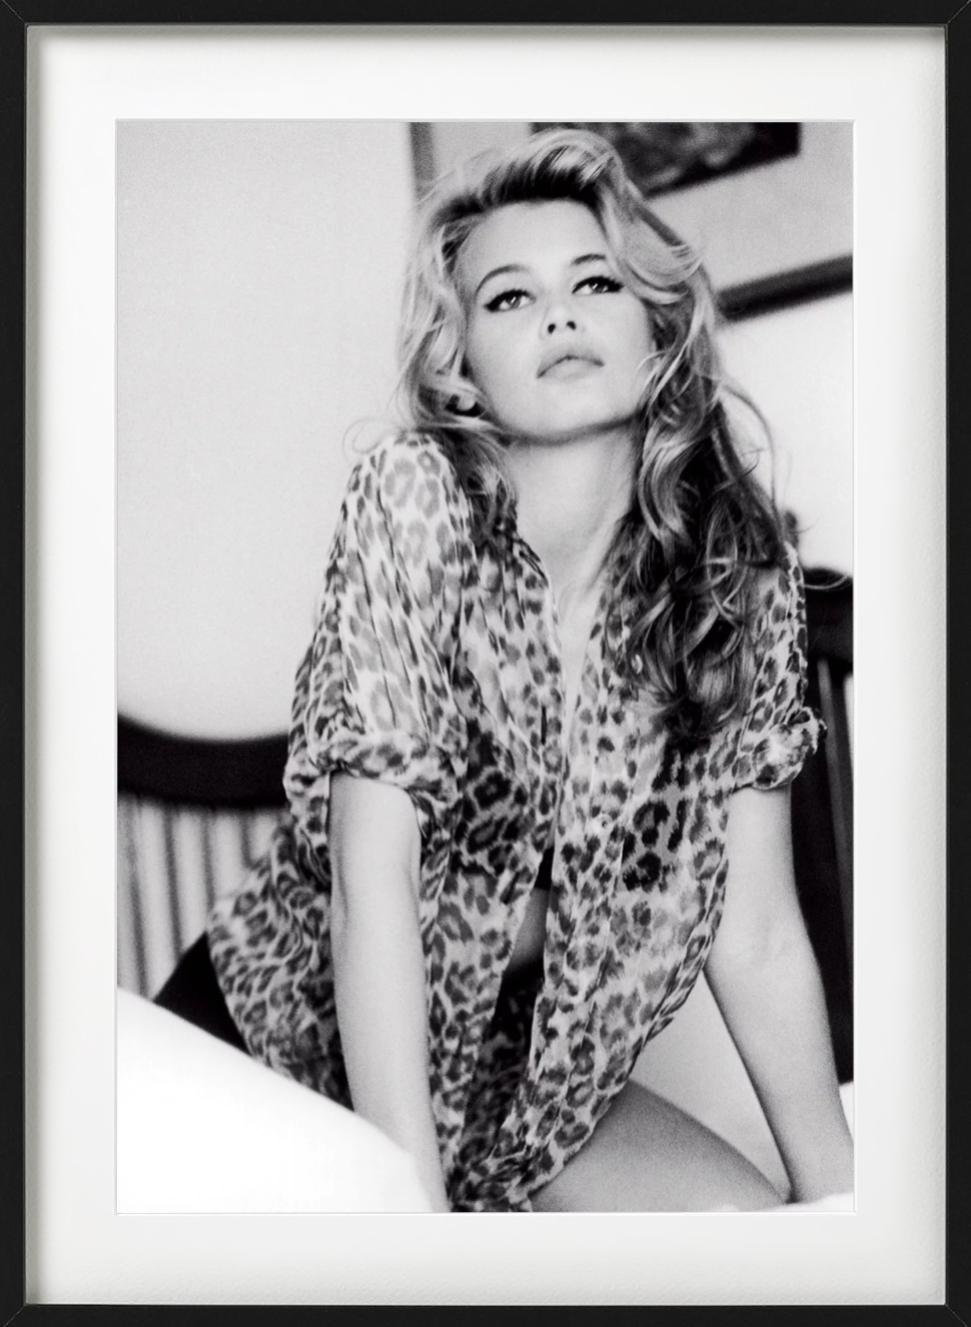 Claudia Schiffer for Guess - Model in Leopard Print, Fine Art Photography, 1989 For Sale 9